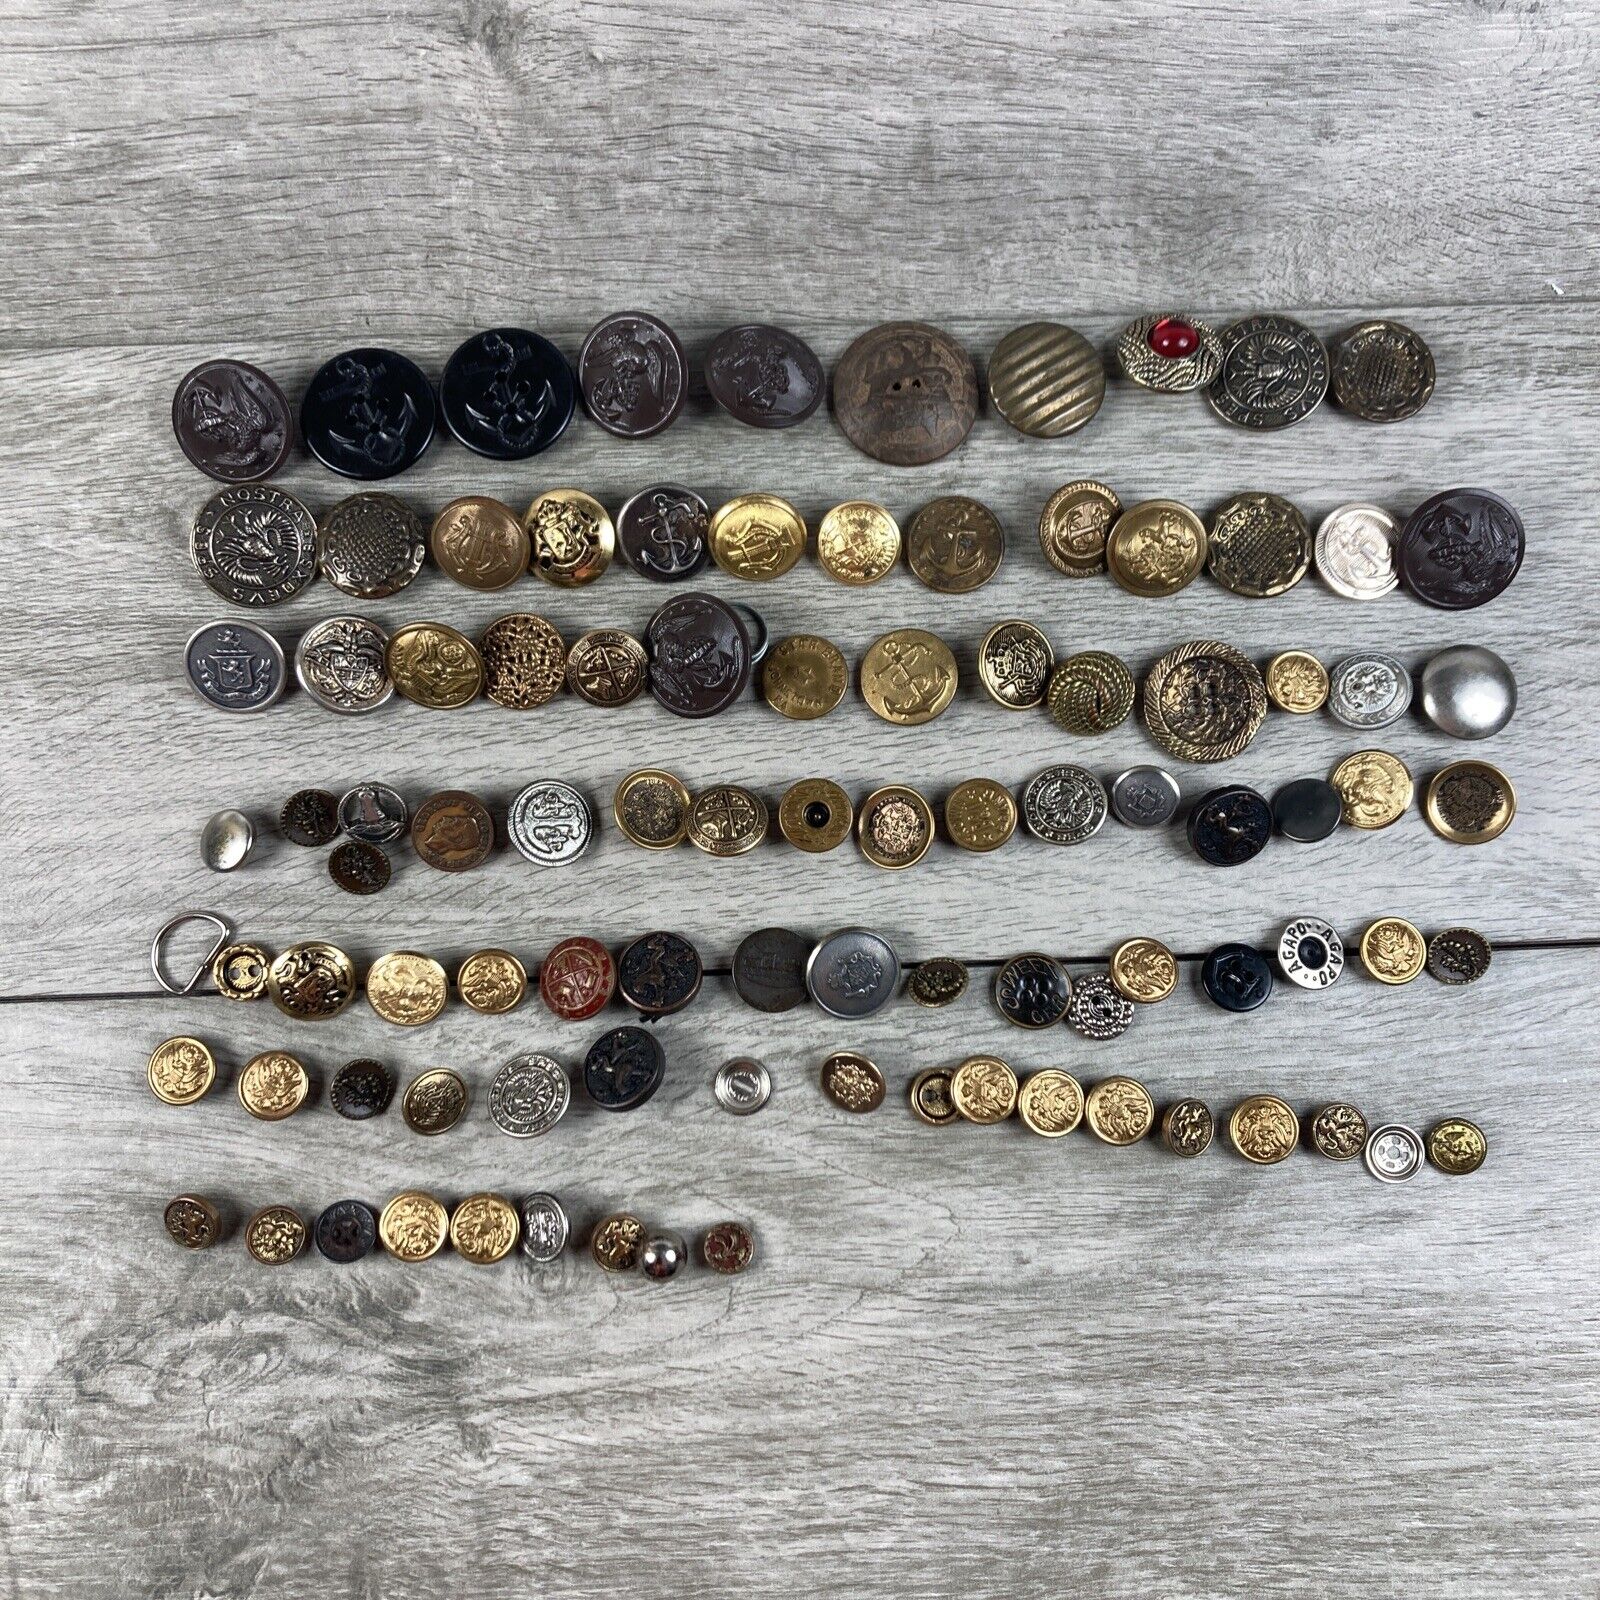 Large Lot Antique Vintage Navy Military Buttons Anchors Approximately 90 Pieces